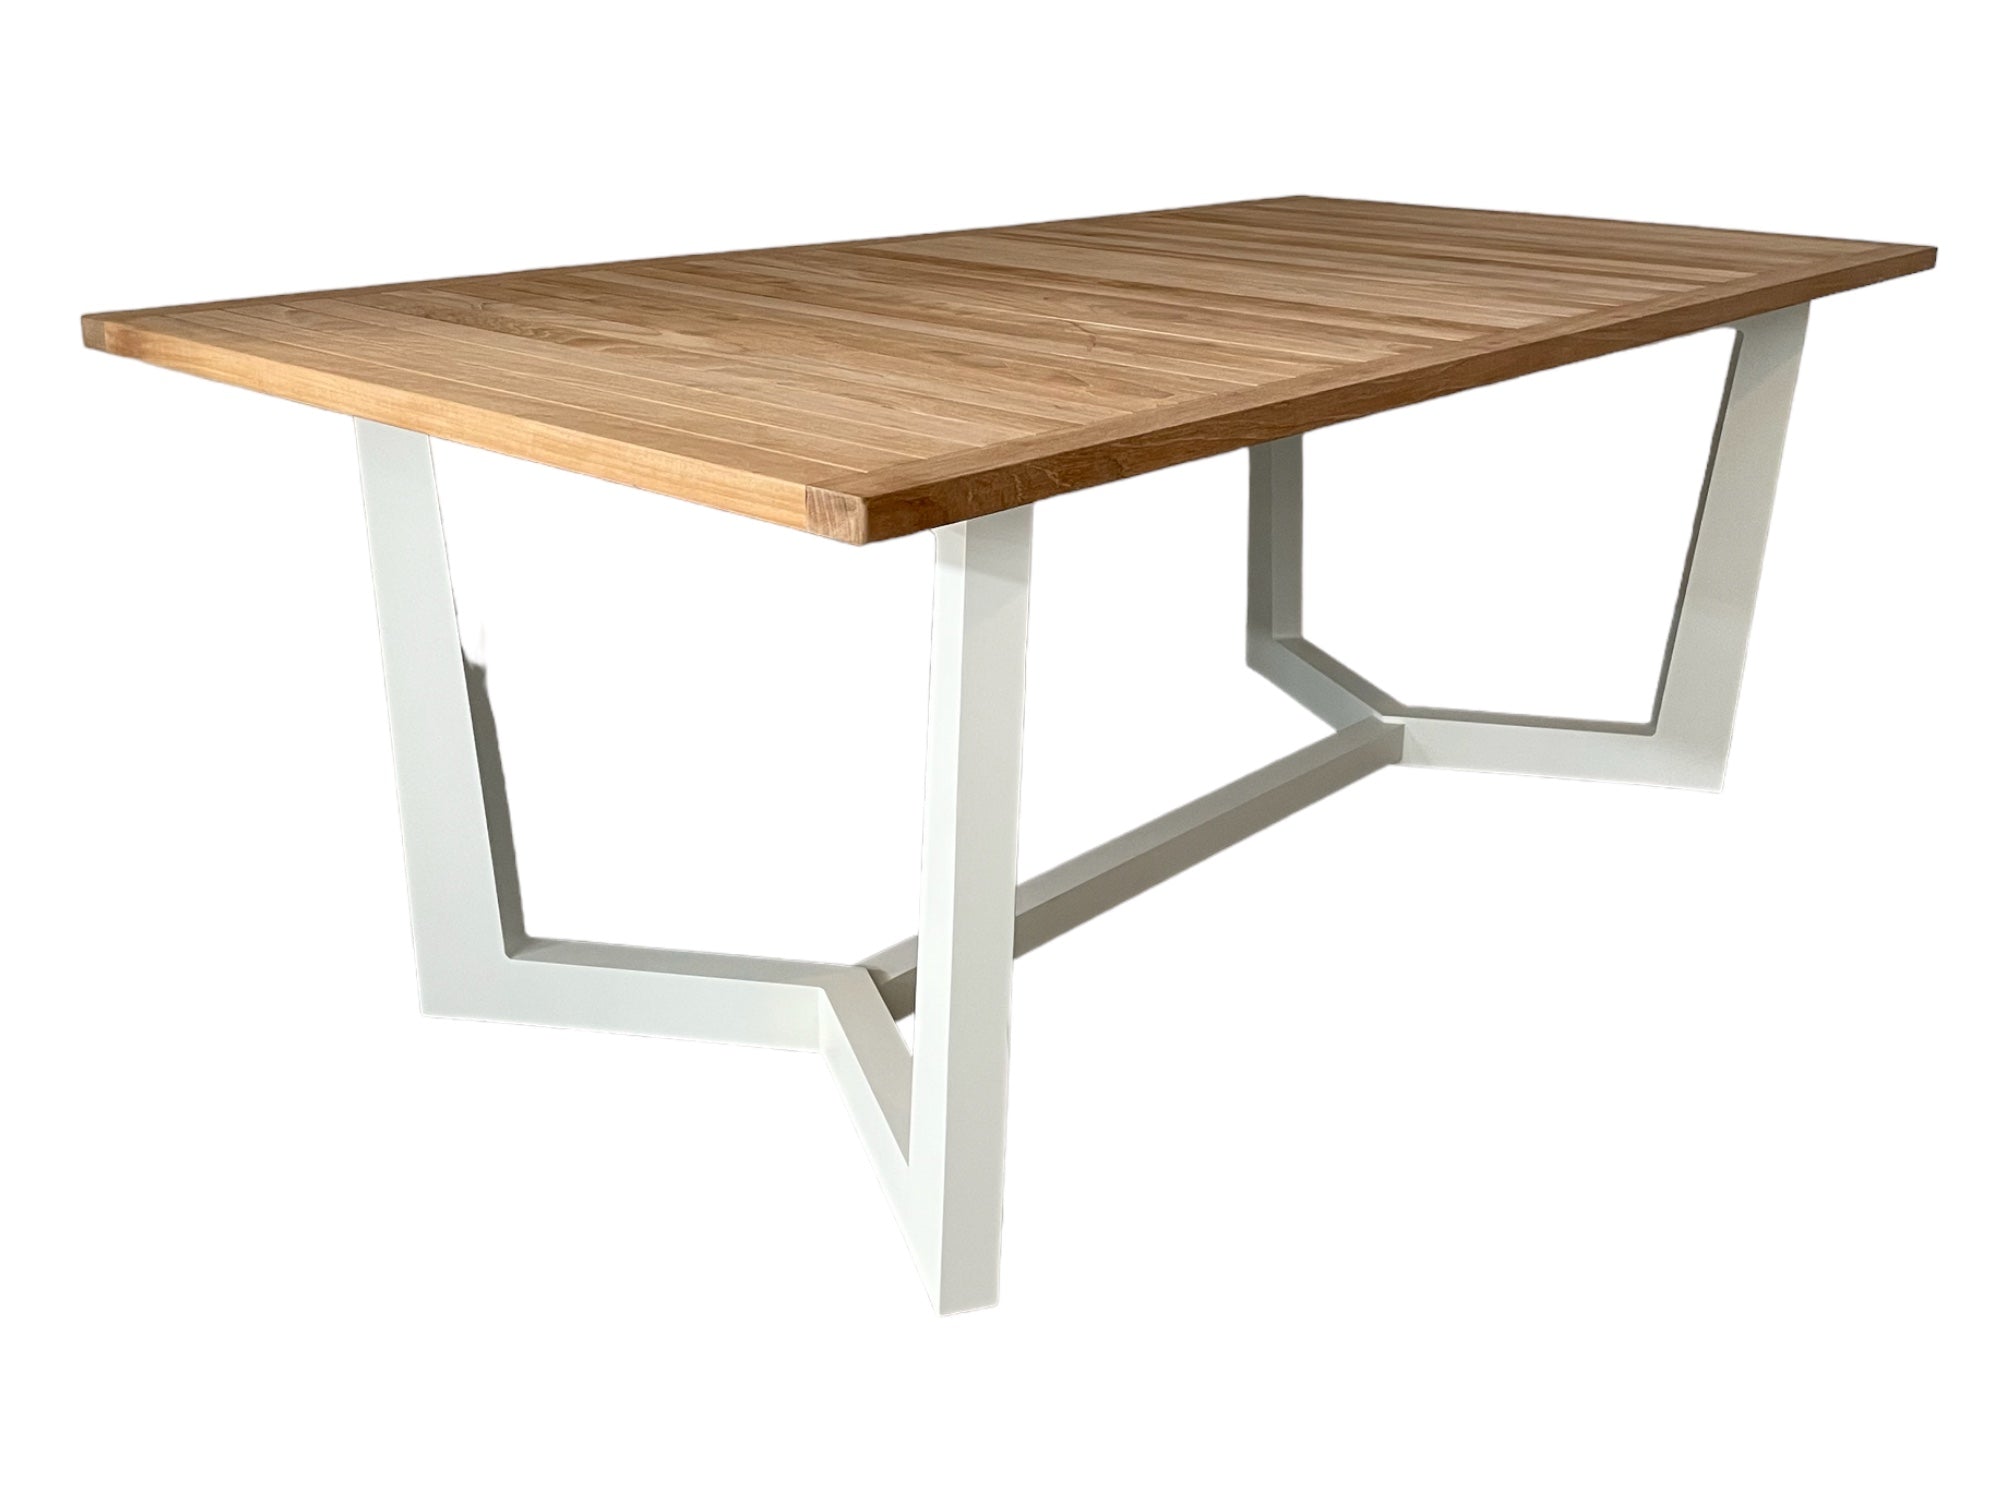 Tiri outdoor dining table - Clearance Item